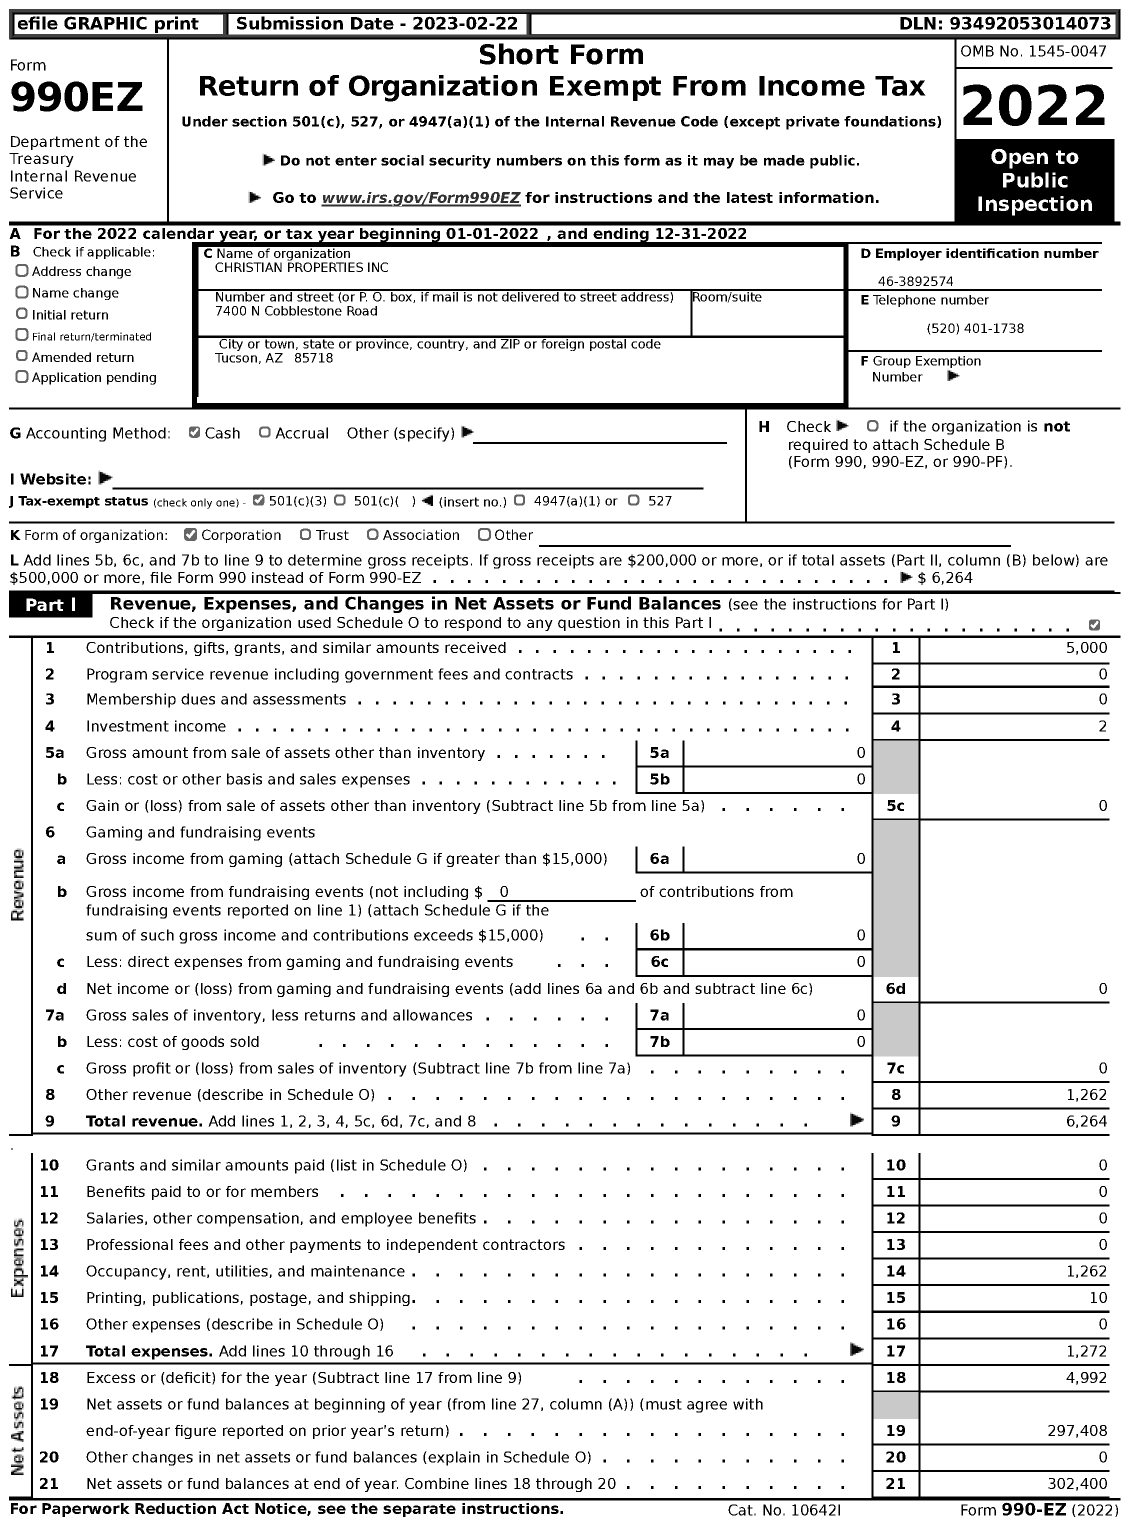 Image of first page of 2022 Form 990EZ for Christian Properties